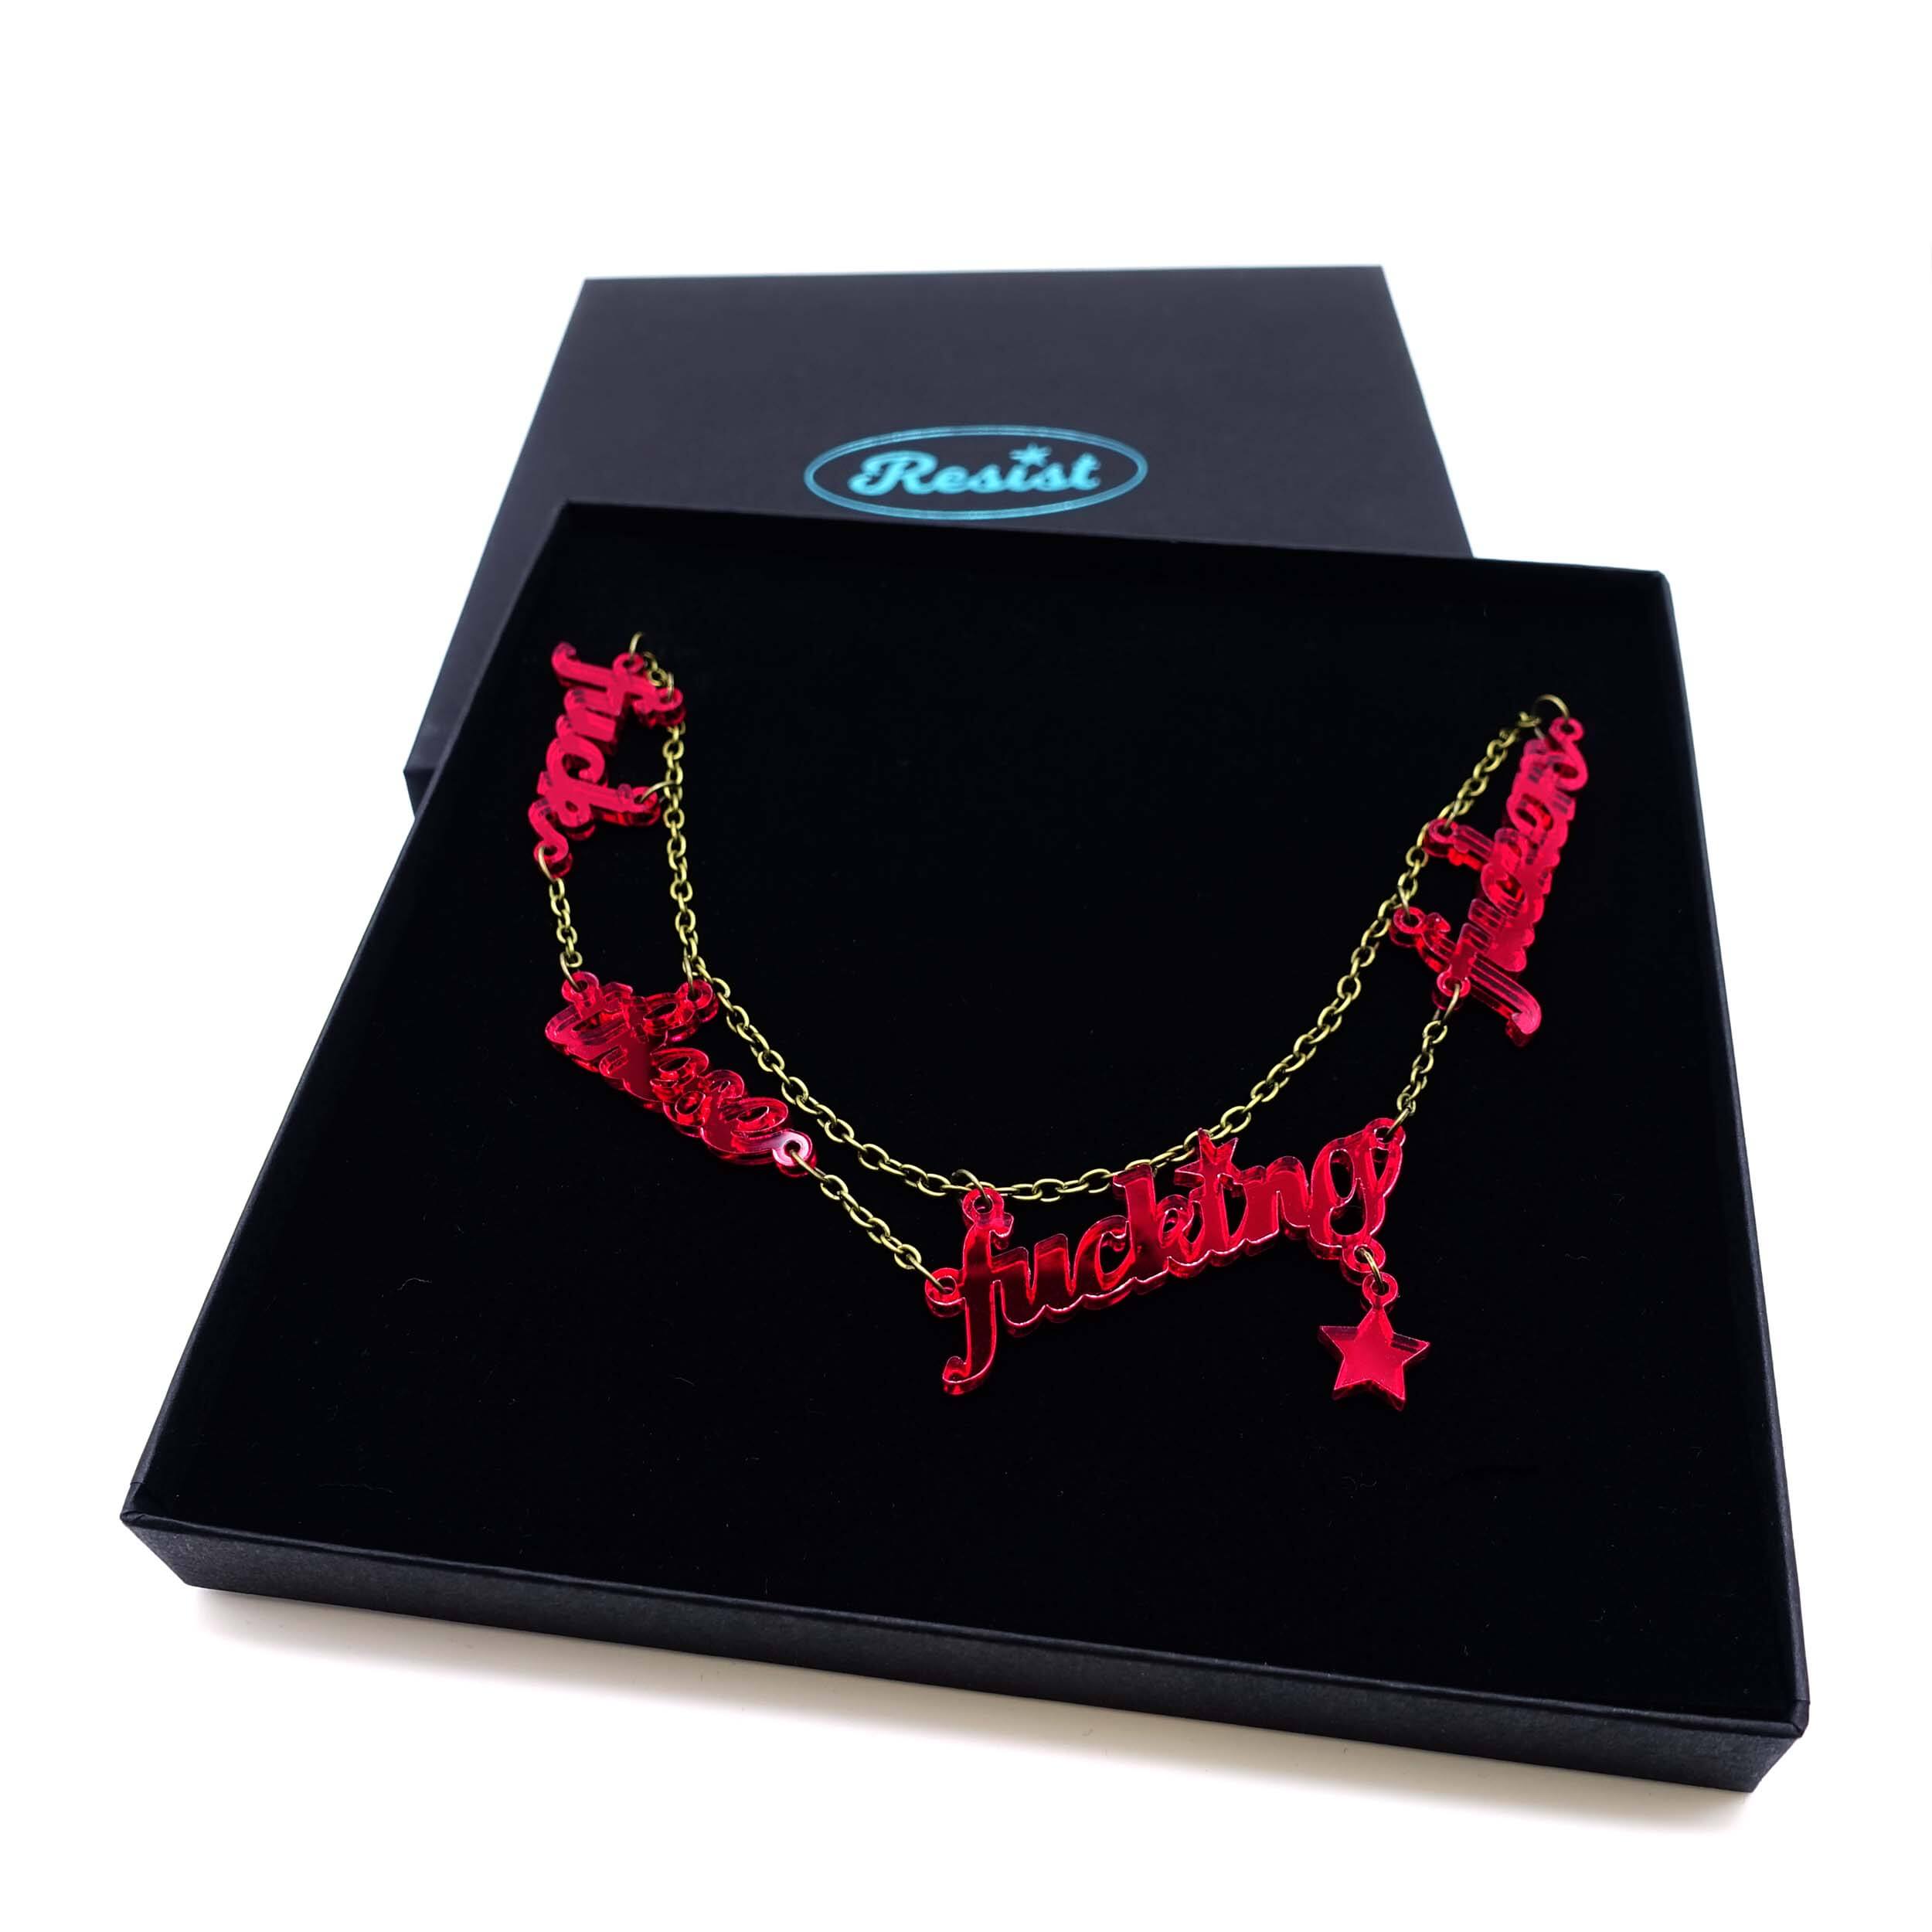 Rose garden red  F*ck These F*cking F*ckers necklace shown in a Wear and Resist large gift box. 